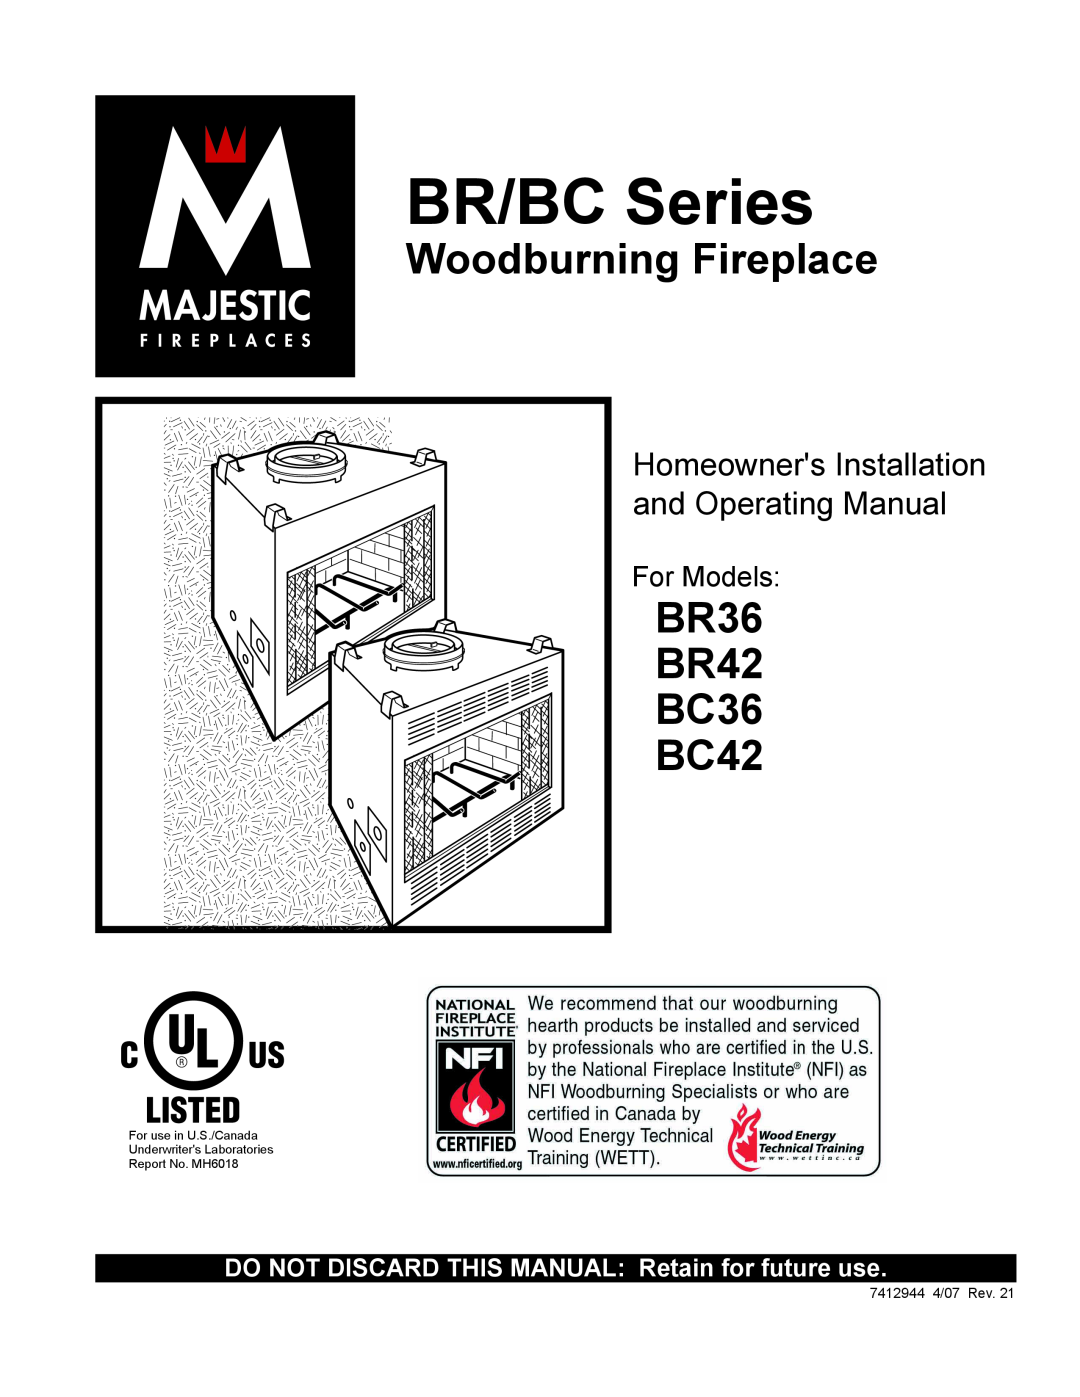 Majestic Appliances manual Woodburning Fireplace, BR36 BR42 BC36 BC42, DO NOT DISCARD THIS MANUAL Retain for future use 